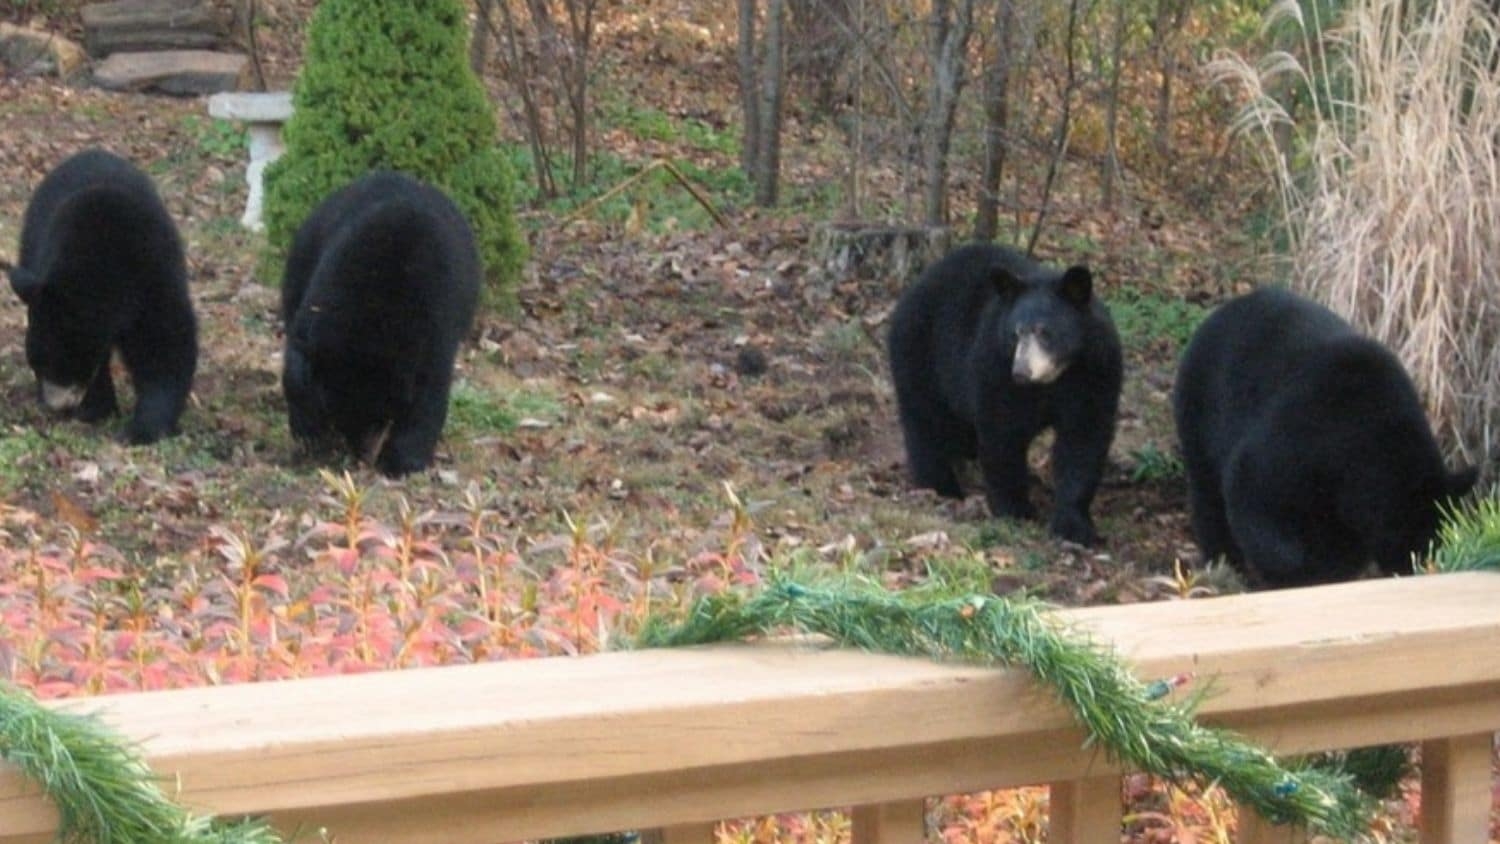 Black bears in Asheville - Young Female Black Bears in Asheville, North Carolina Are Big, Have Cubs Early - Forestry and Environmental Resources NC State University